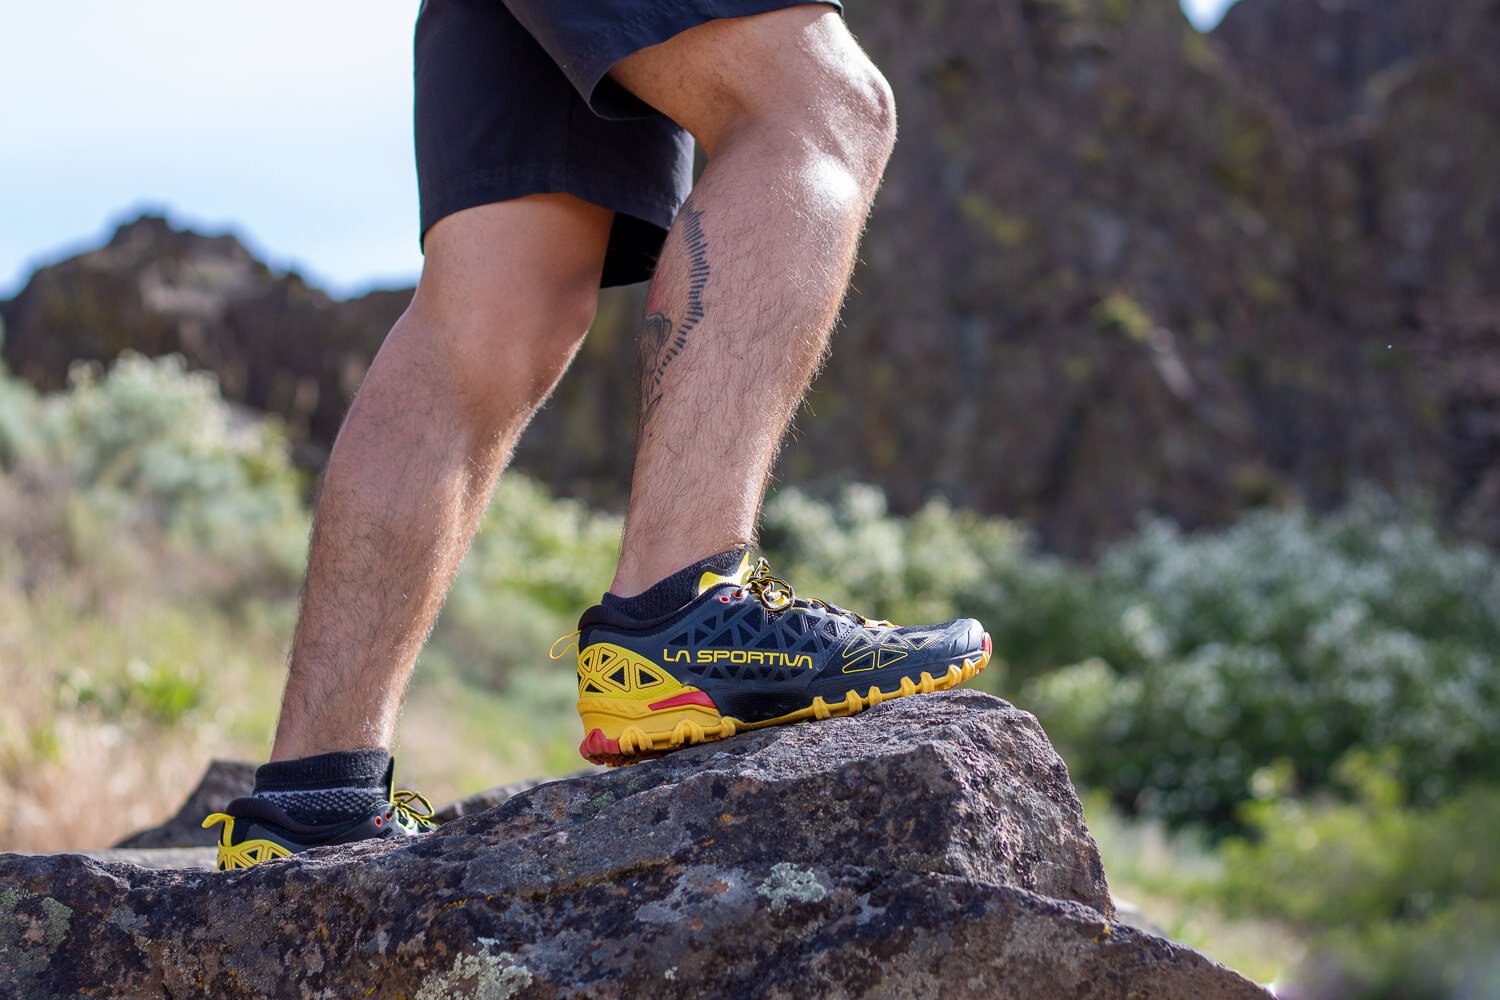 The La Sportiva Bushido II is a burly shoe with awesome traction for tackling technical mountain trails